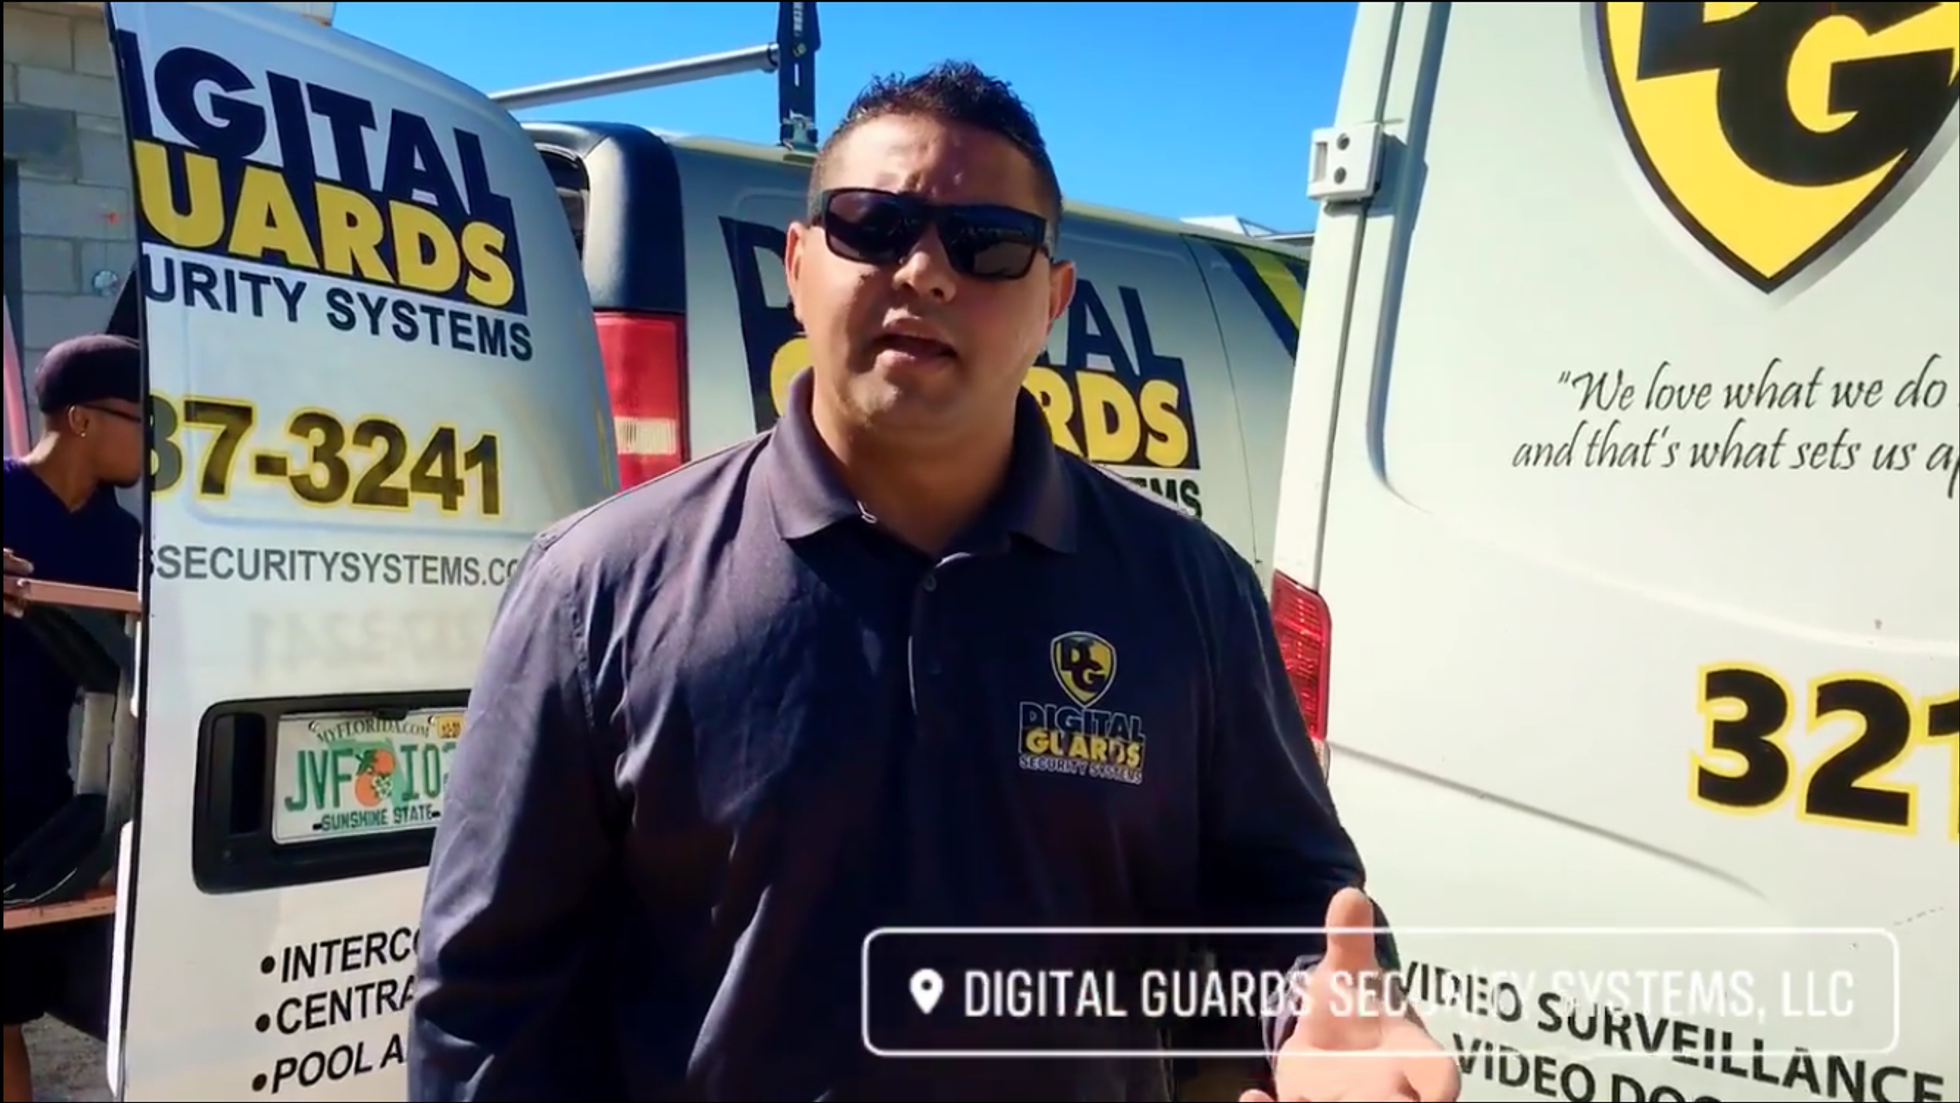 Digital Guards Services - Click twice to play